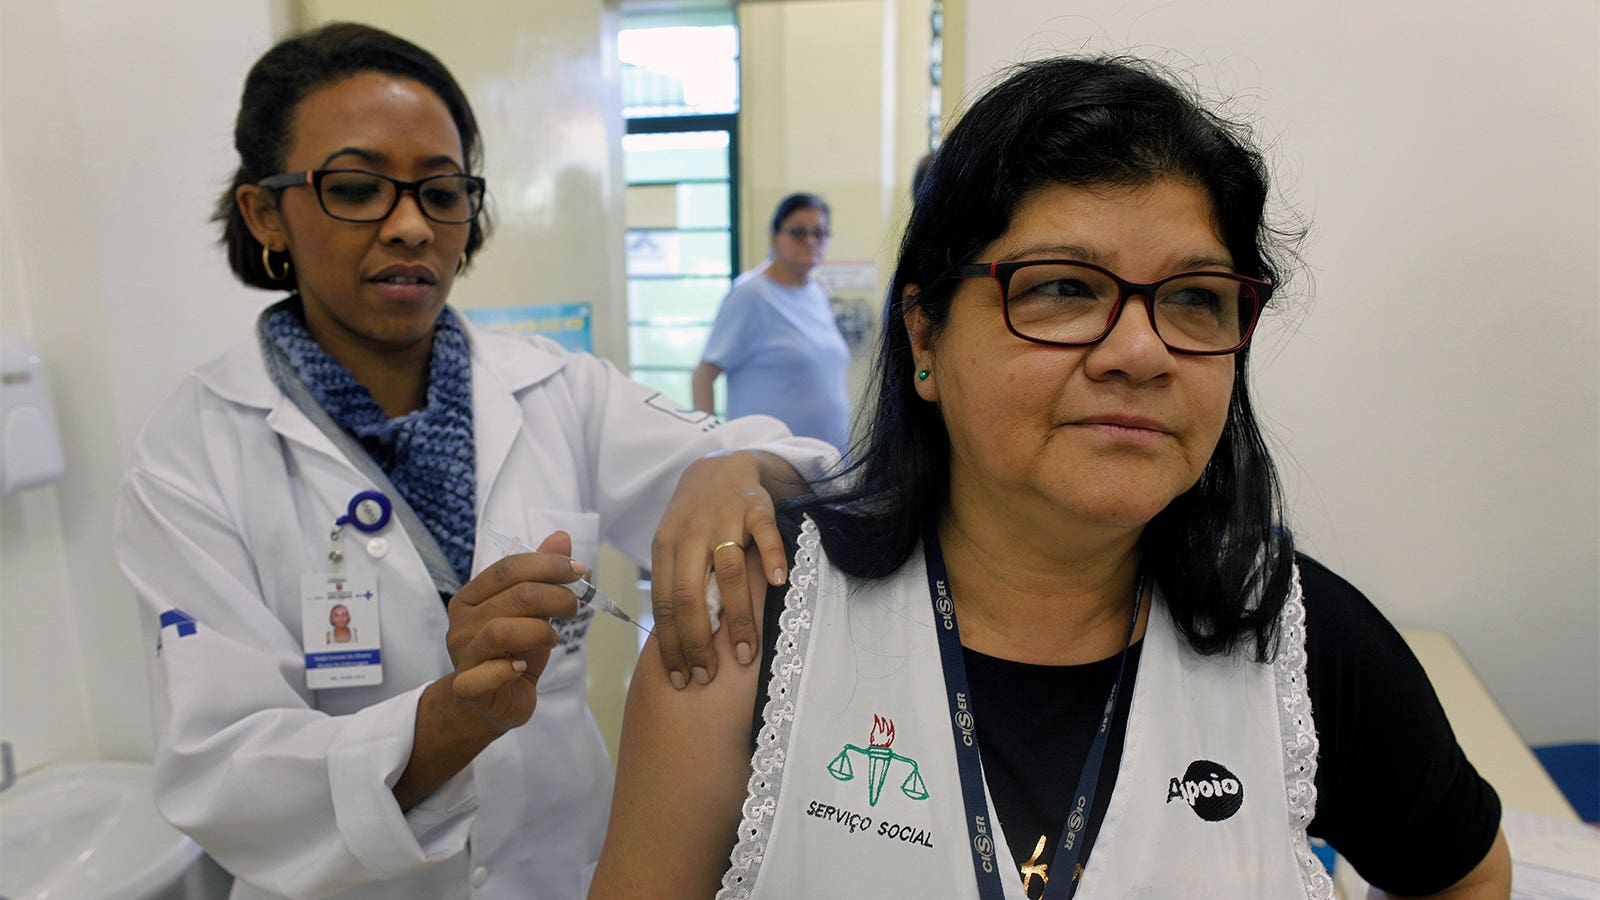 CDC: This Season’s Flu Shot Appears Effective Against Serious Cases